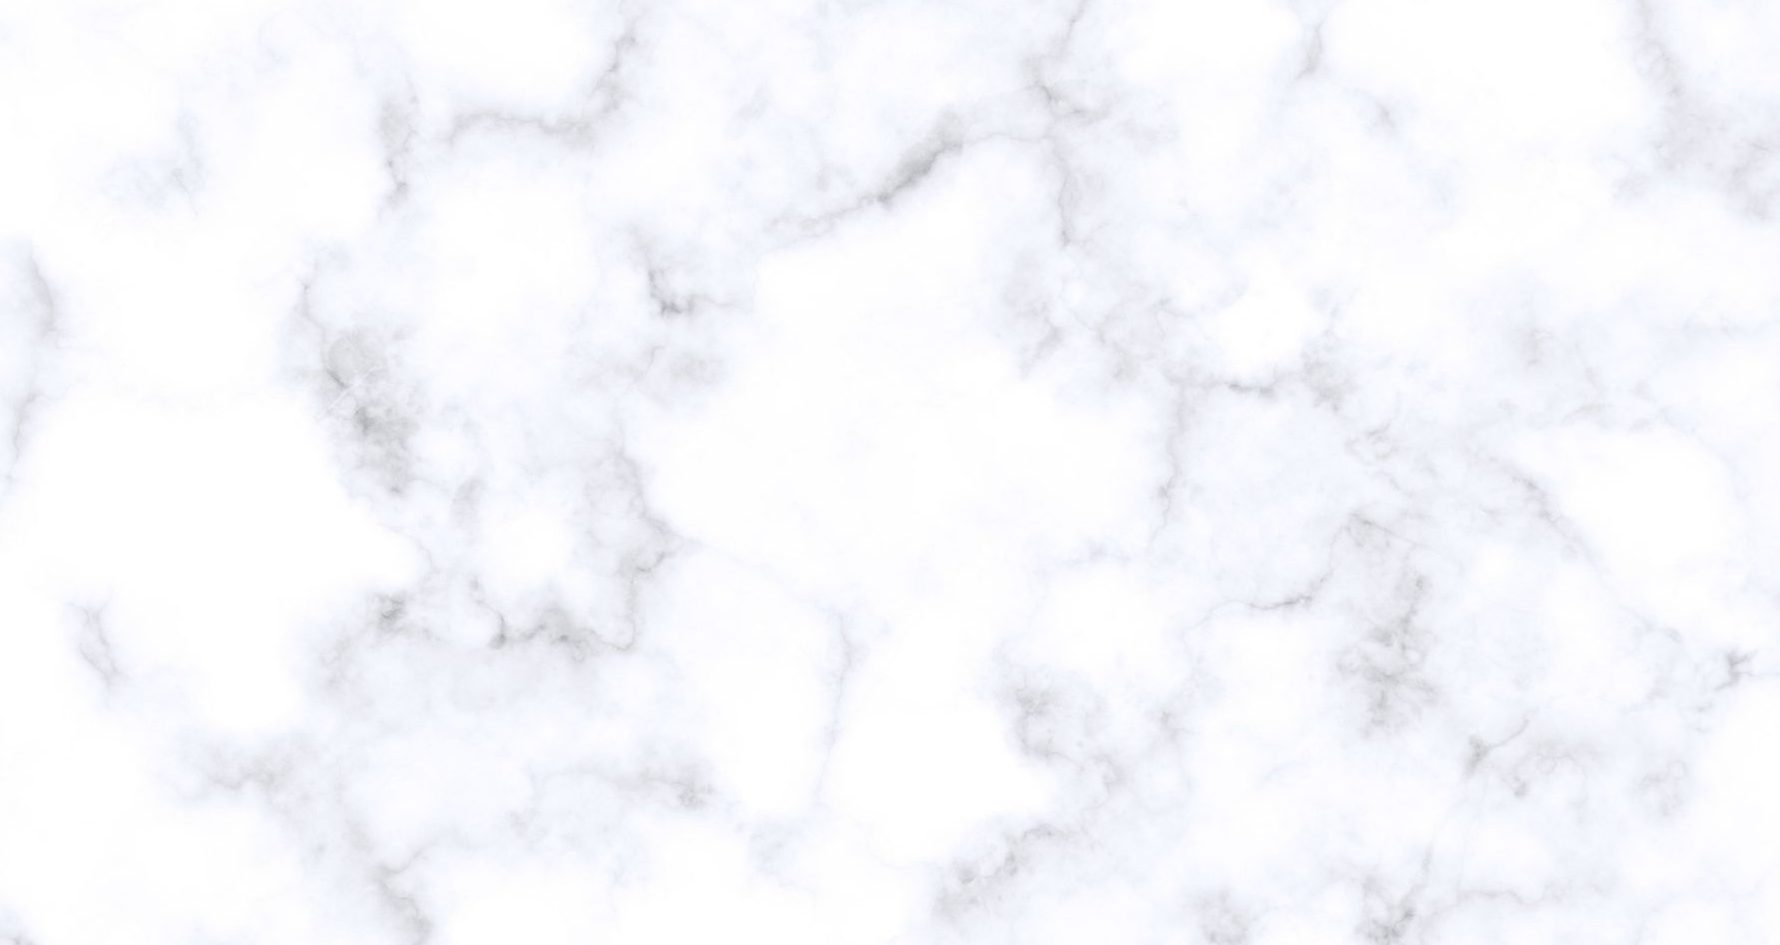 Global Marble Market Outlook, Opportunities And Strategies – Includes Marble Market Share